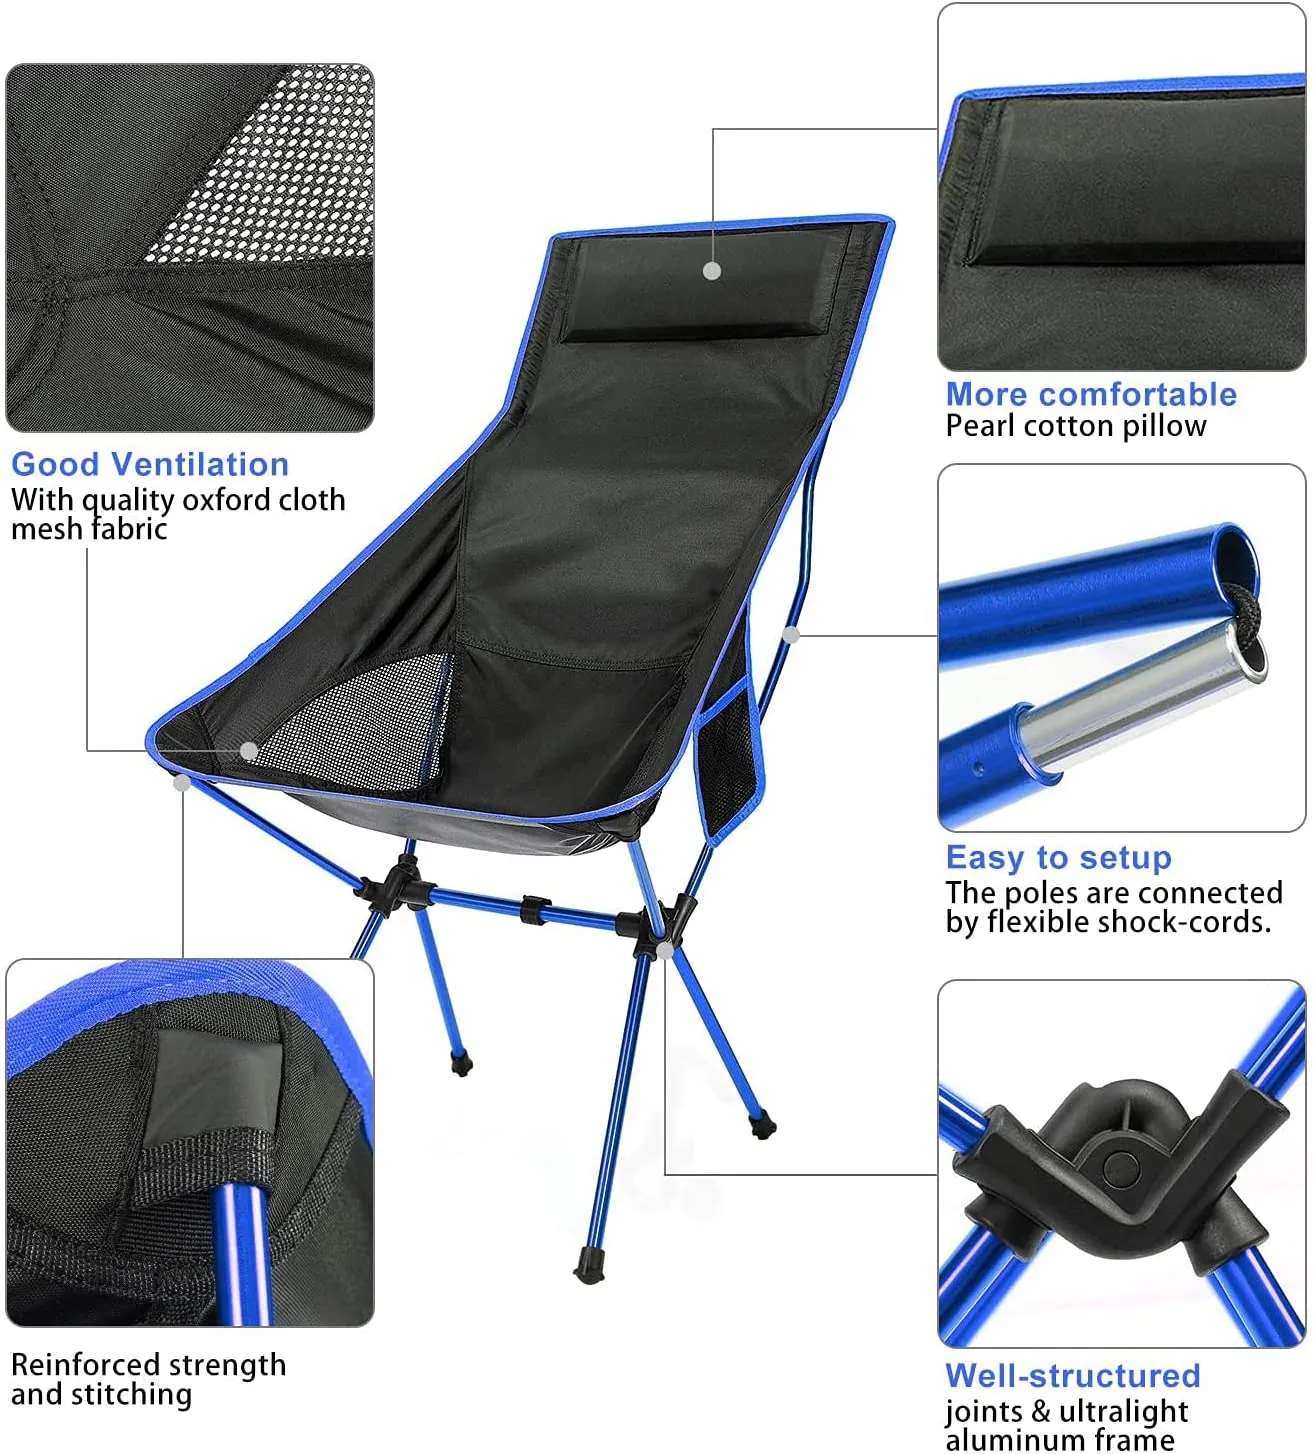 Portable Lightweight Camping Chair For Outdoor Activities Backpacking,  Hiking, Travel, Picnic, Fishing, Beach Folding Design Folding Camp Stool  Lightweight 230617 From Keng06, $35.31